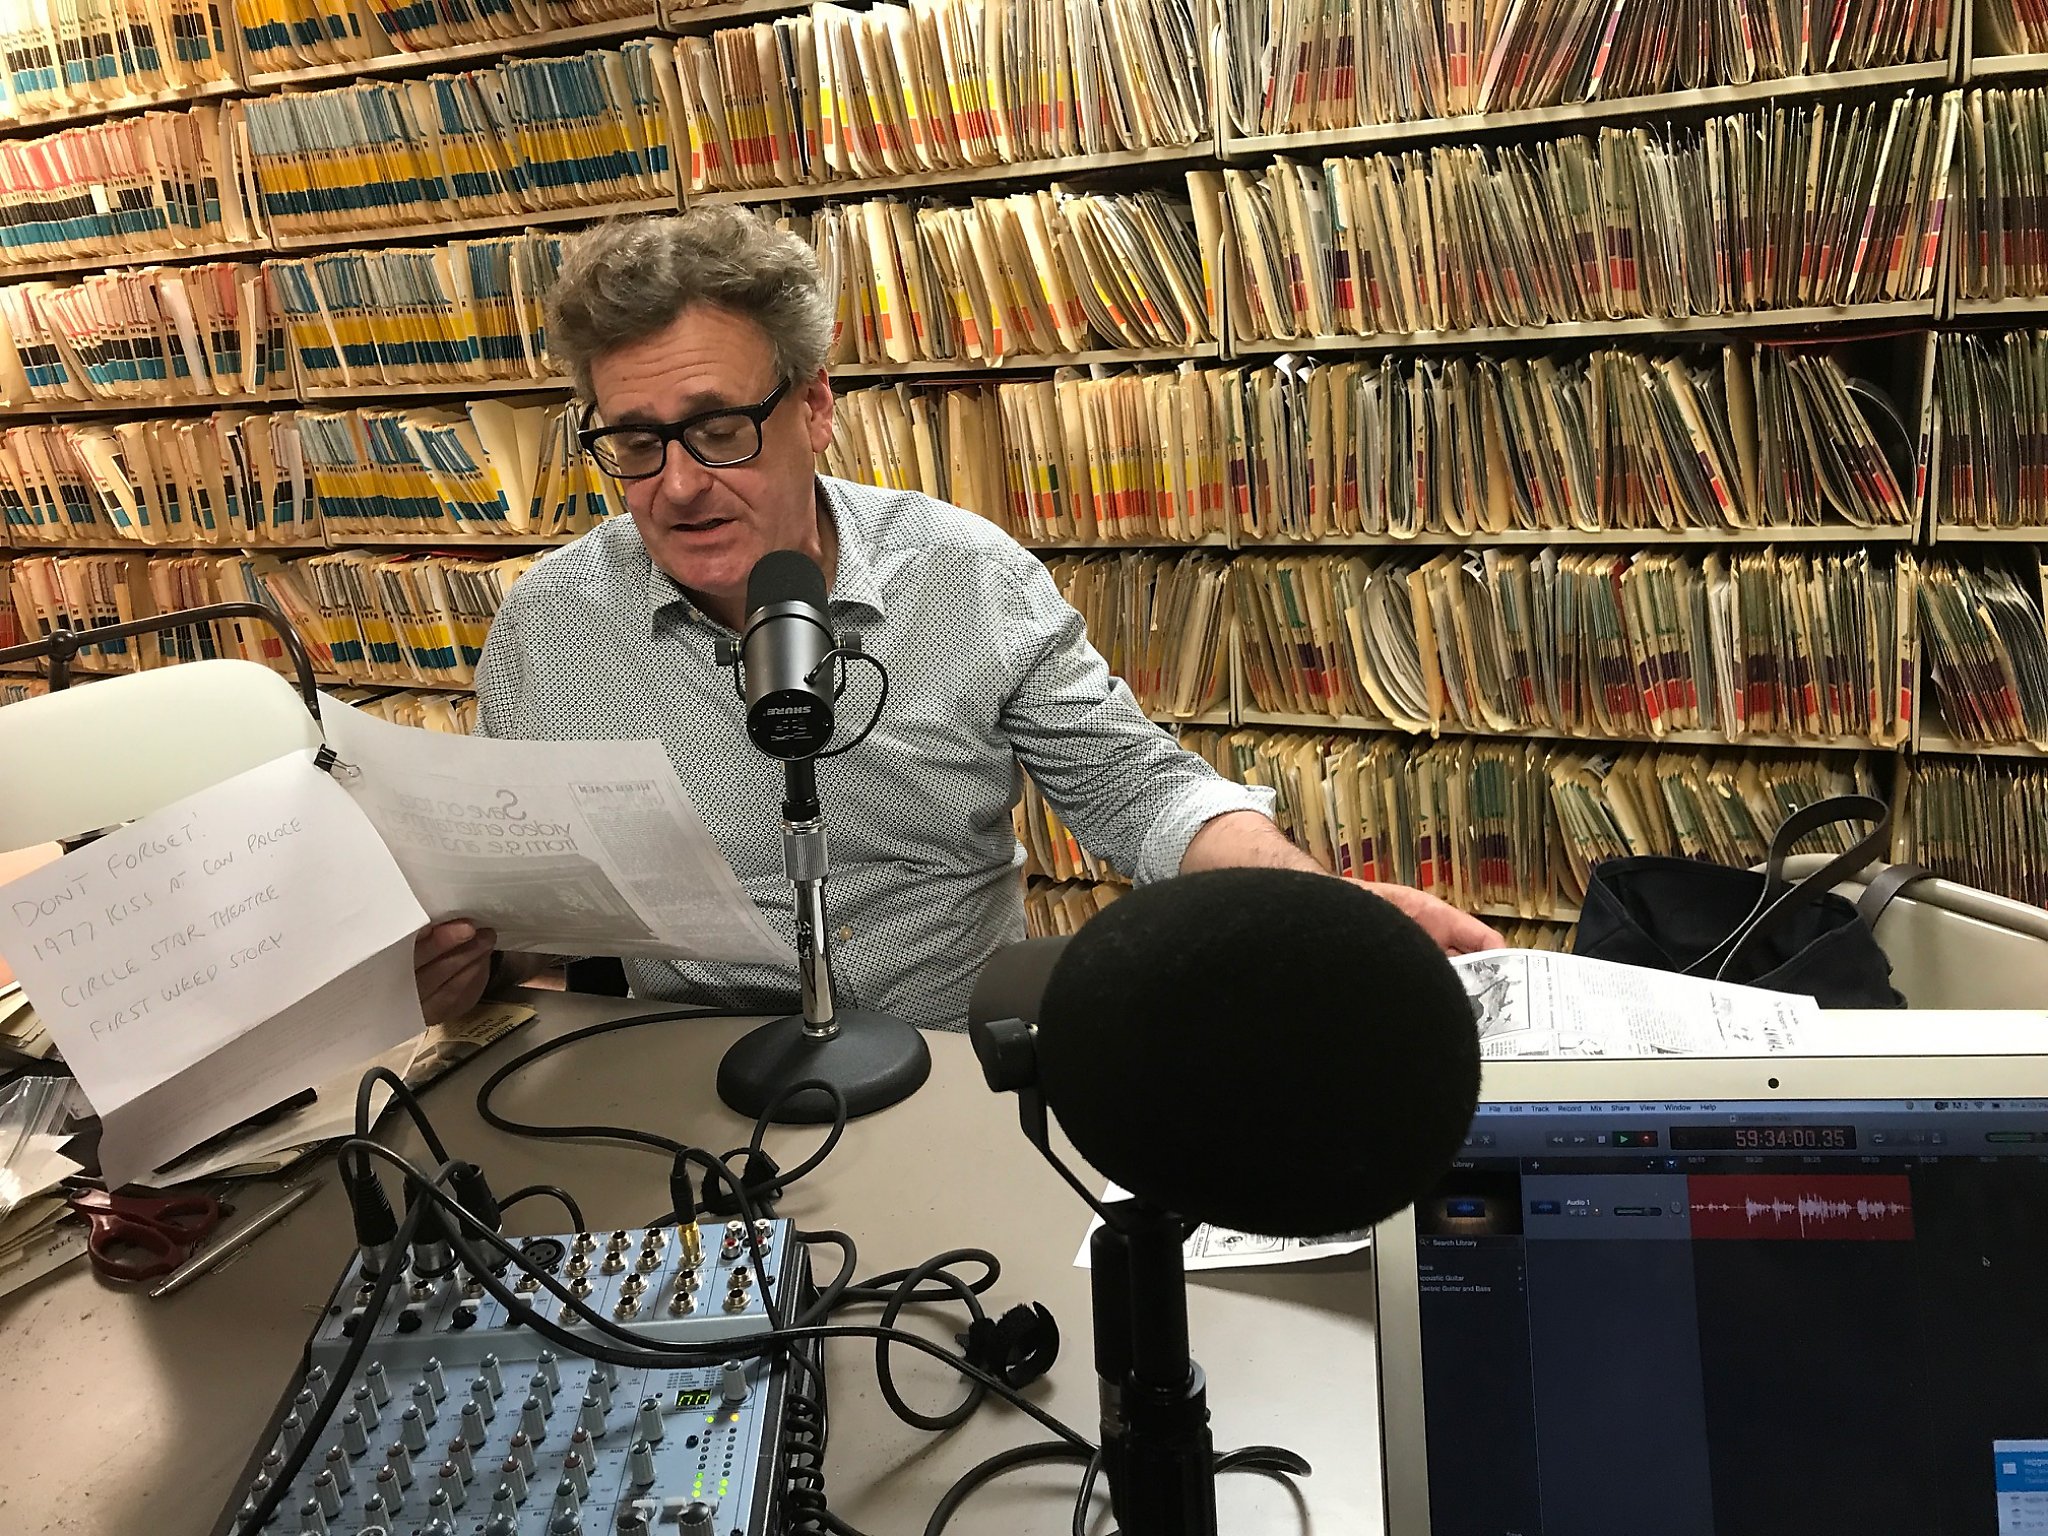 Podcast: Greg Proops still feels at home in San Francisco - San Francisco Chronicle